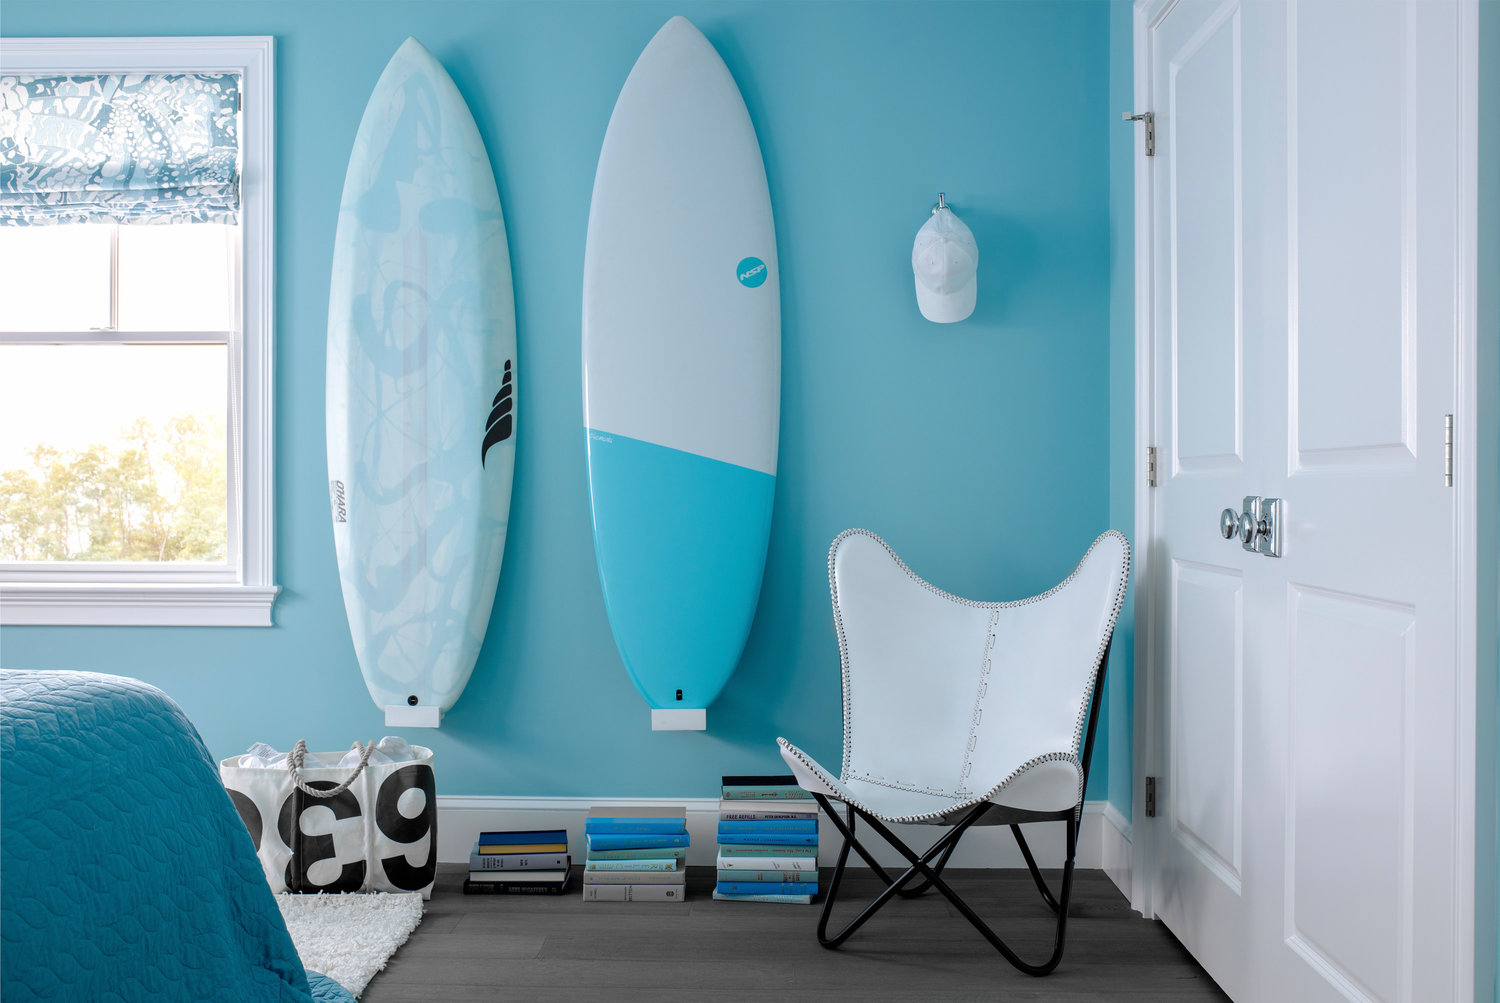 Ocean State surf culture was the inspo for the aqua guest bedroom, while accents in black and white keep the look grounded